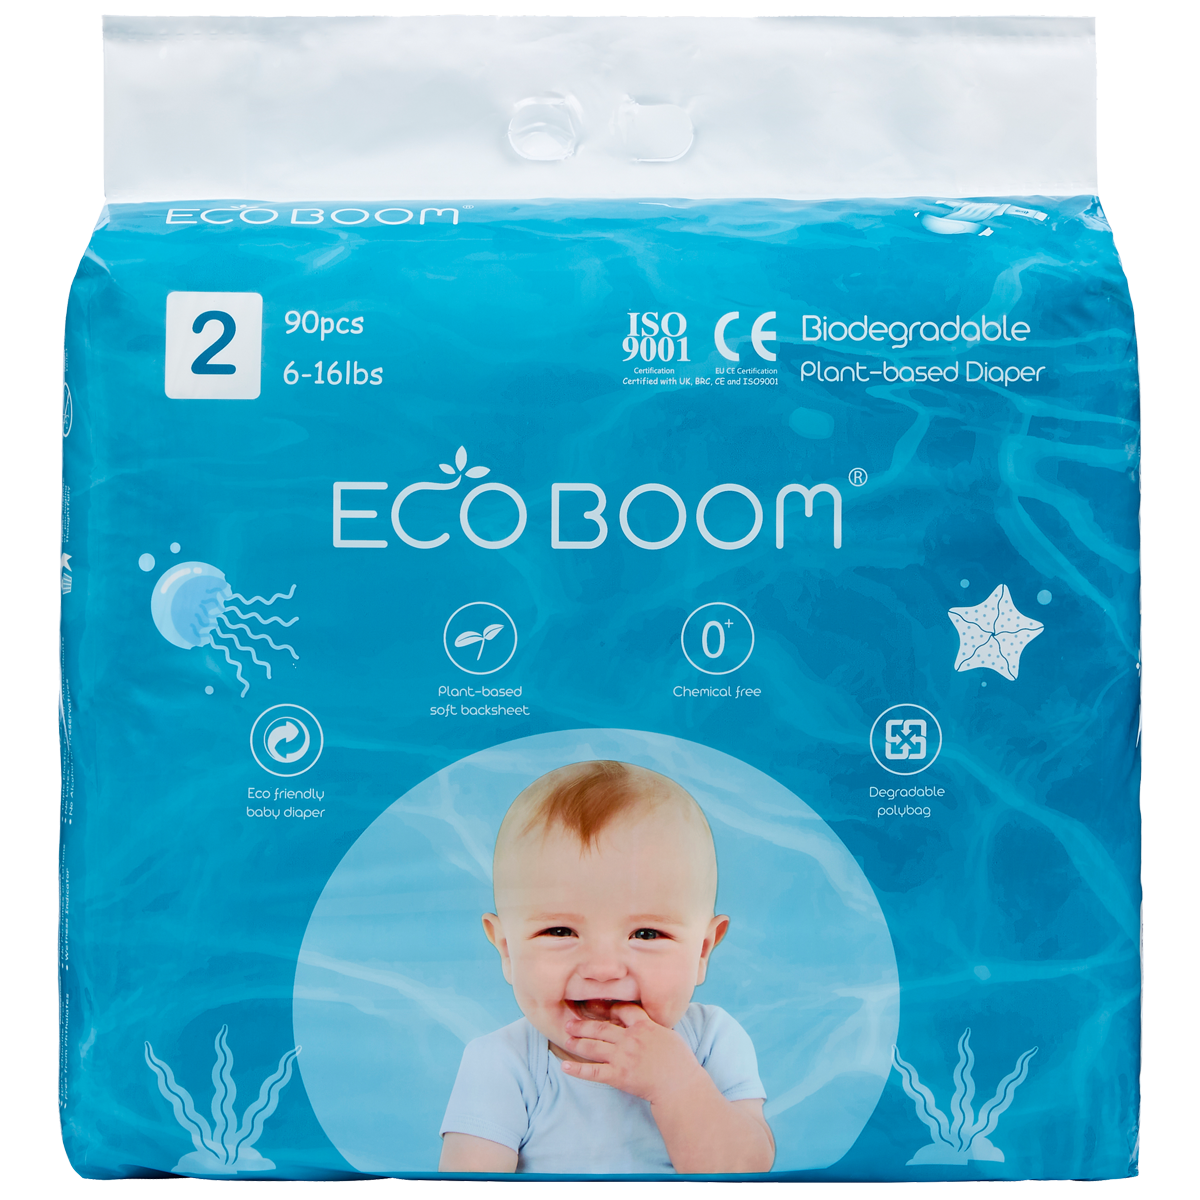 Small Tape Plant-Based Eco Boom Eco Friendly Biodegredable Diapers for Babies 6-16 pounds,90 pcs